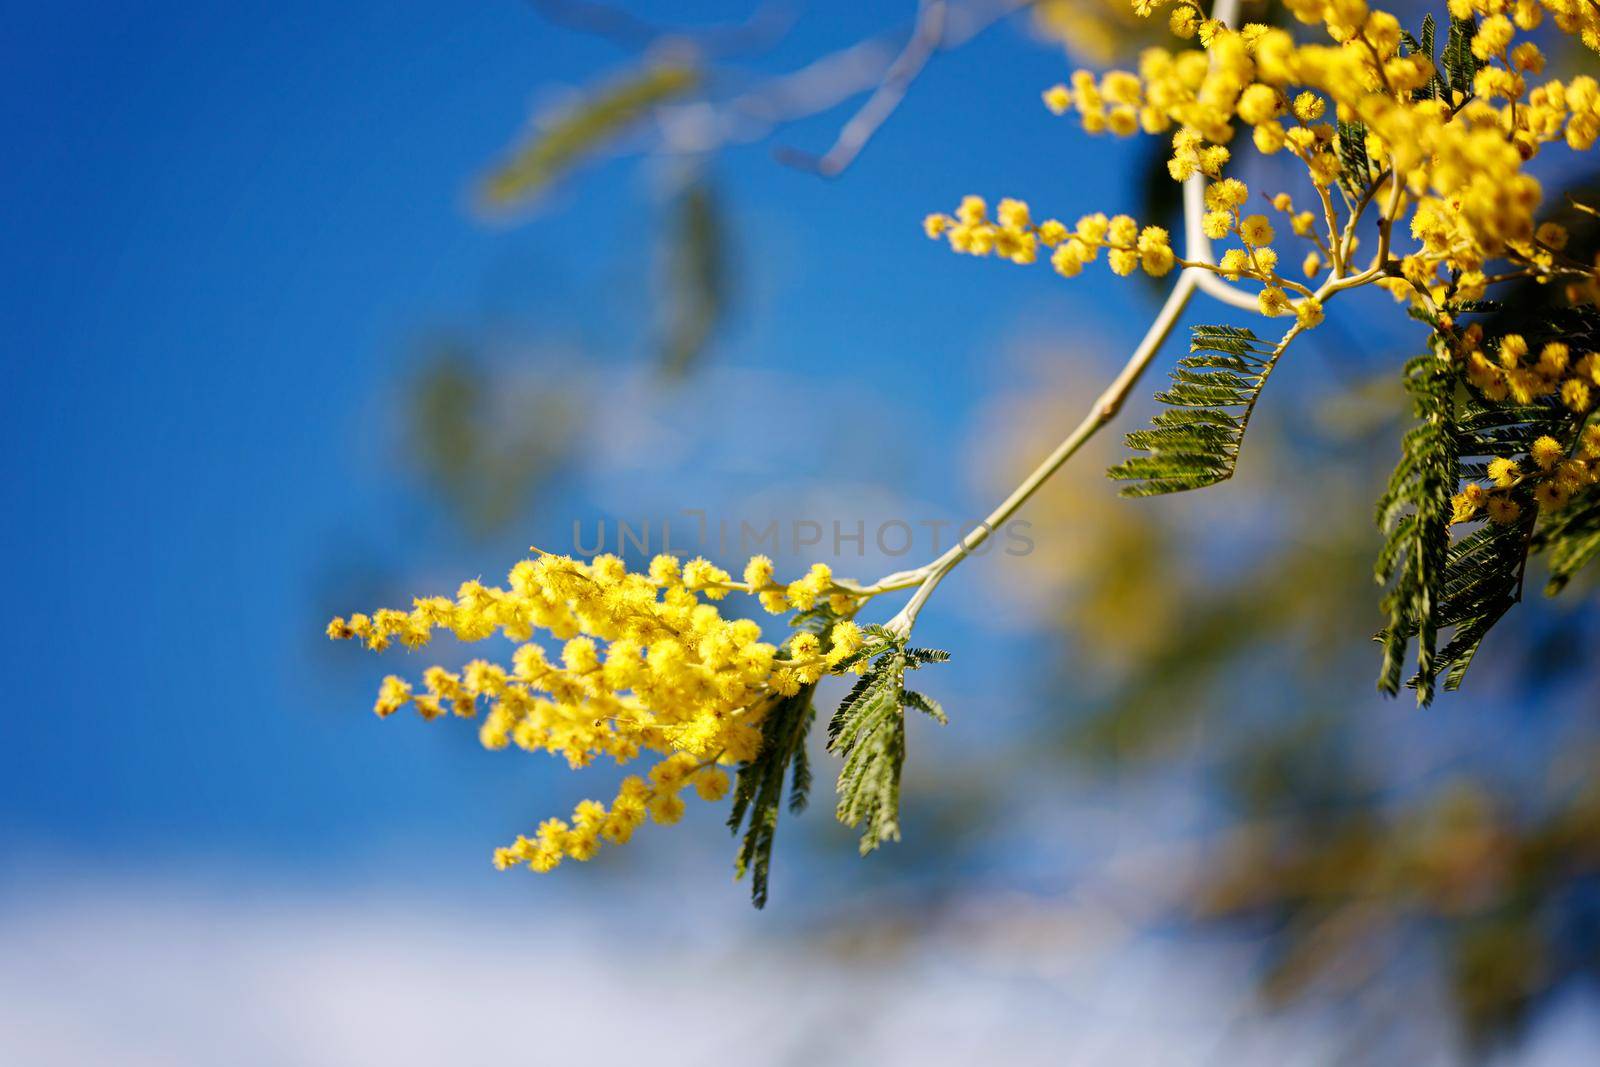 Yellow flowers of a mimosa tree on a background of blue sky by lifesummerlin